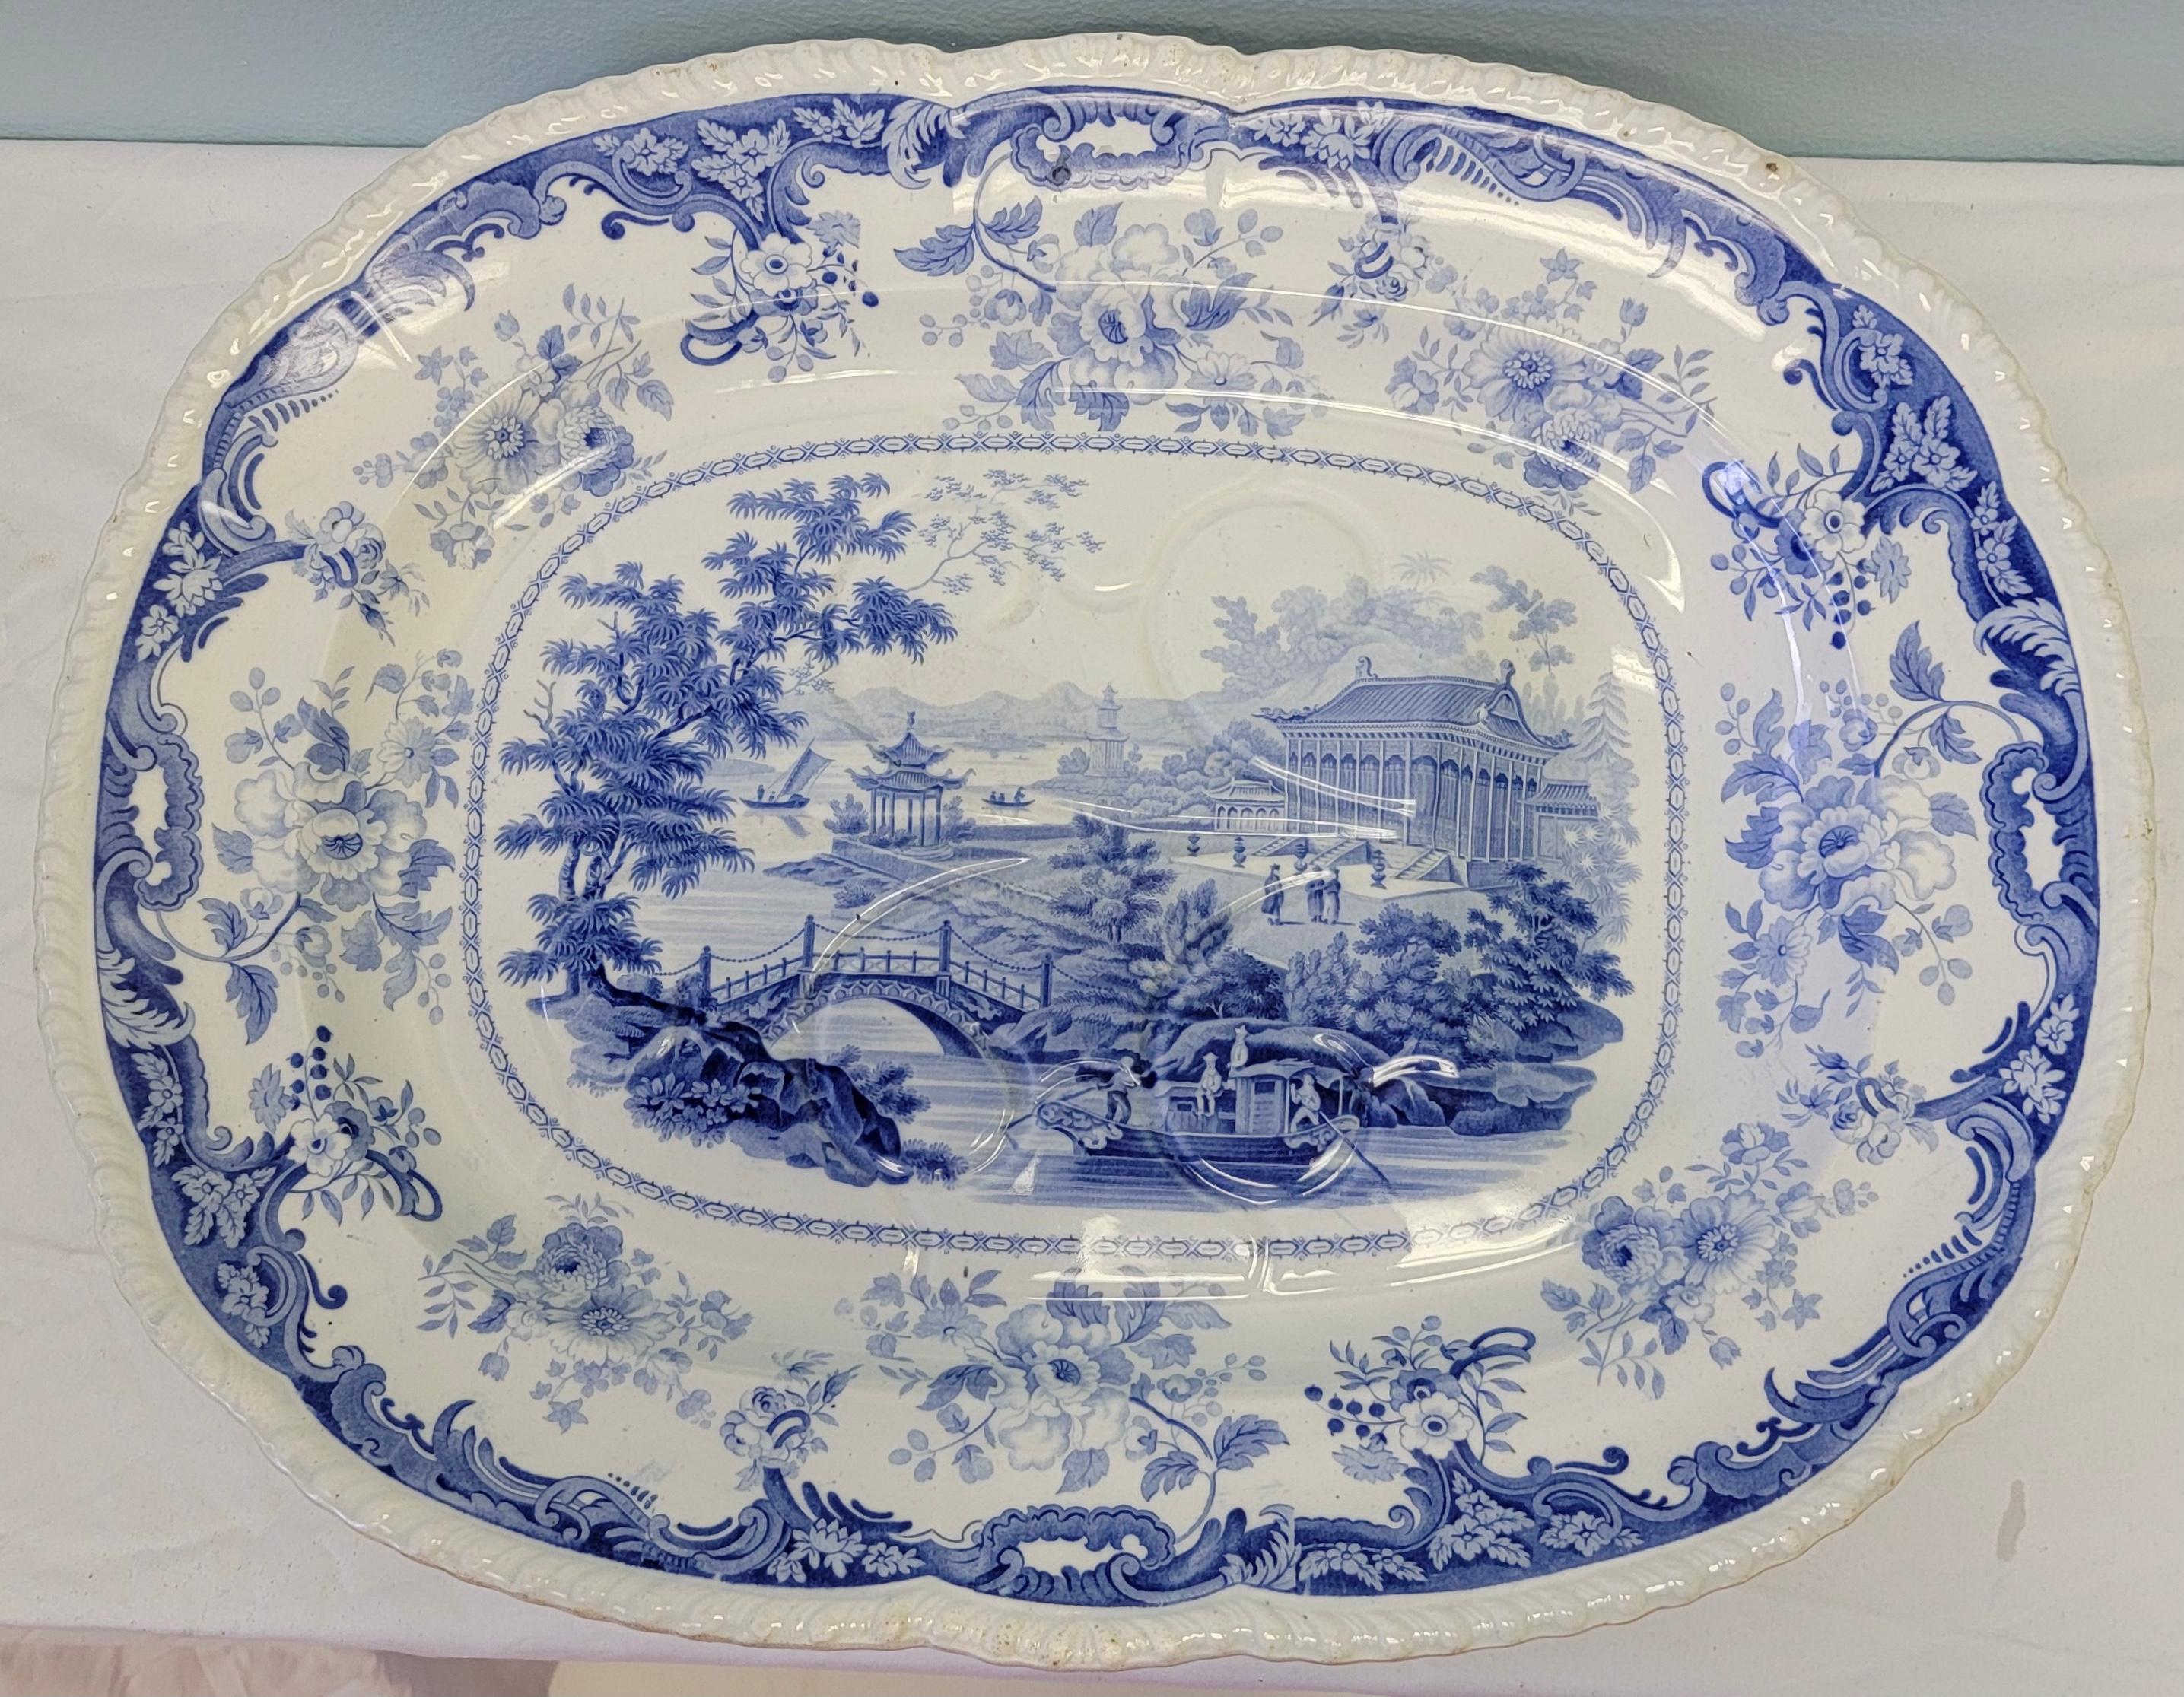 Chinoiserie 19th-C. Minton Chinese Marine Opaque Blue and White Transferware Platter